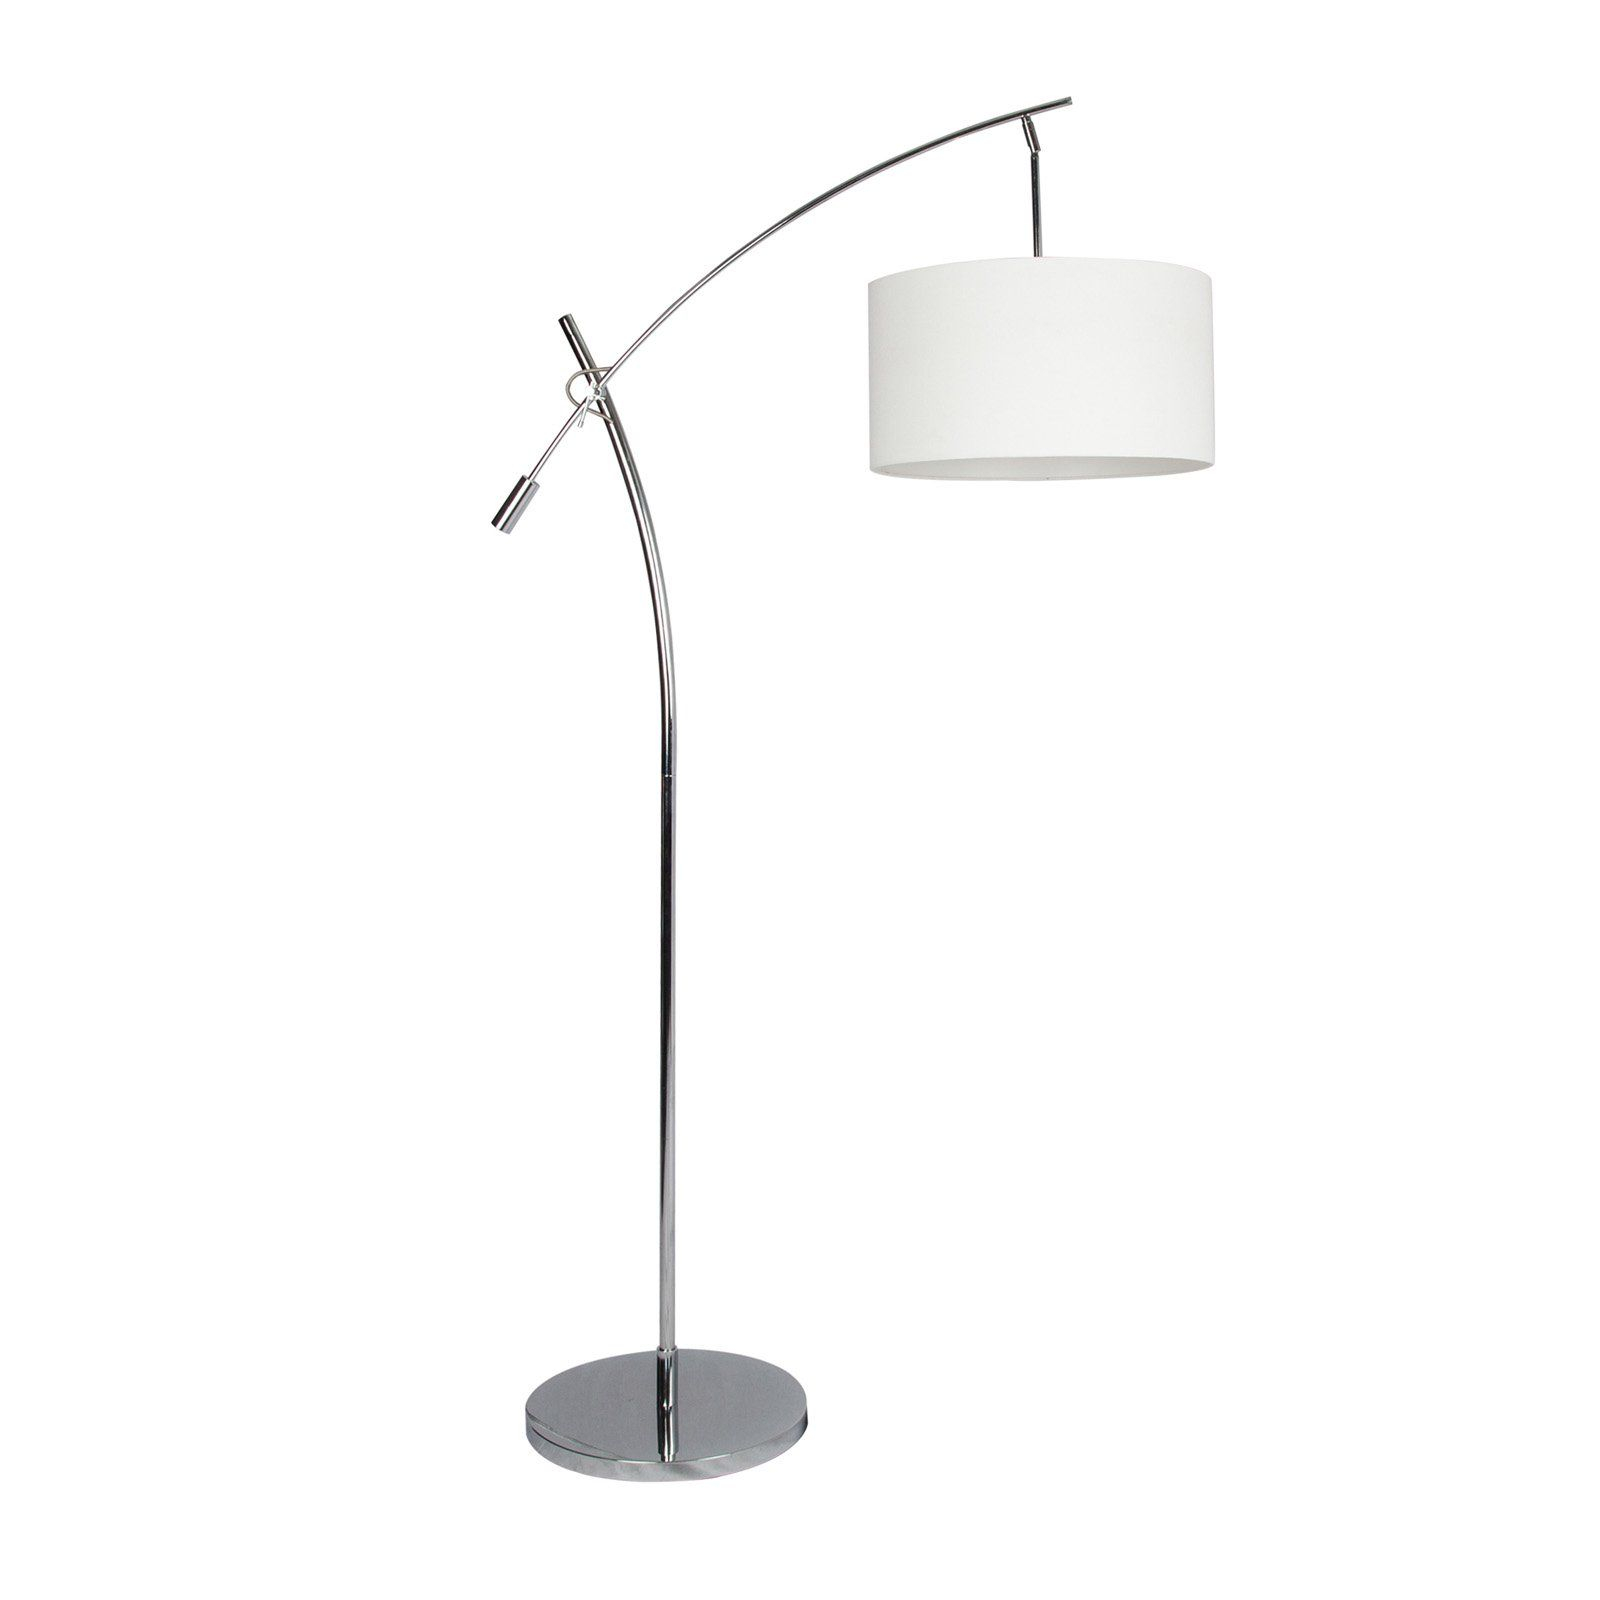 Incadozo Boom Arc Floor Lamp Products In 2019 Arc Floor intended for size 1600 X 1600